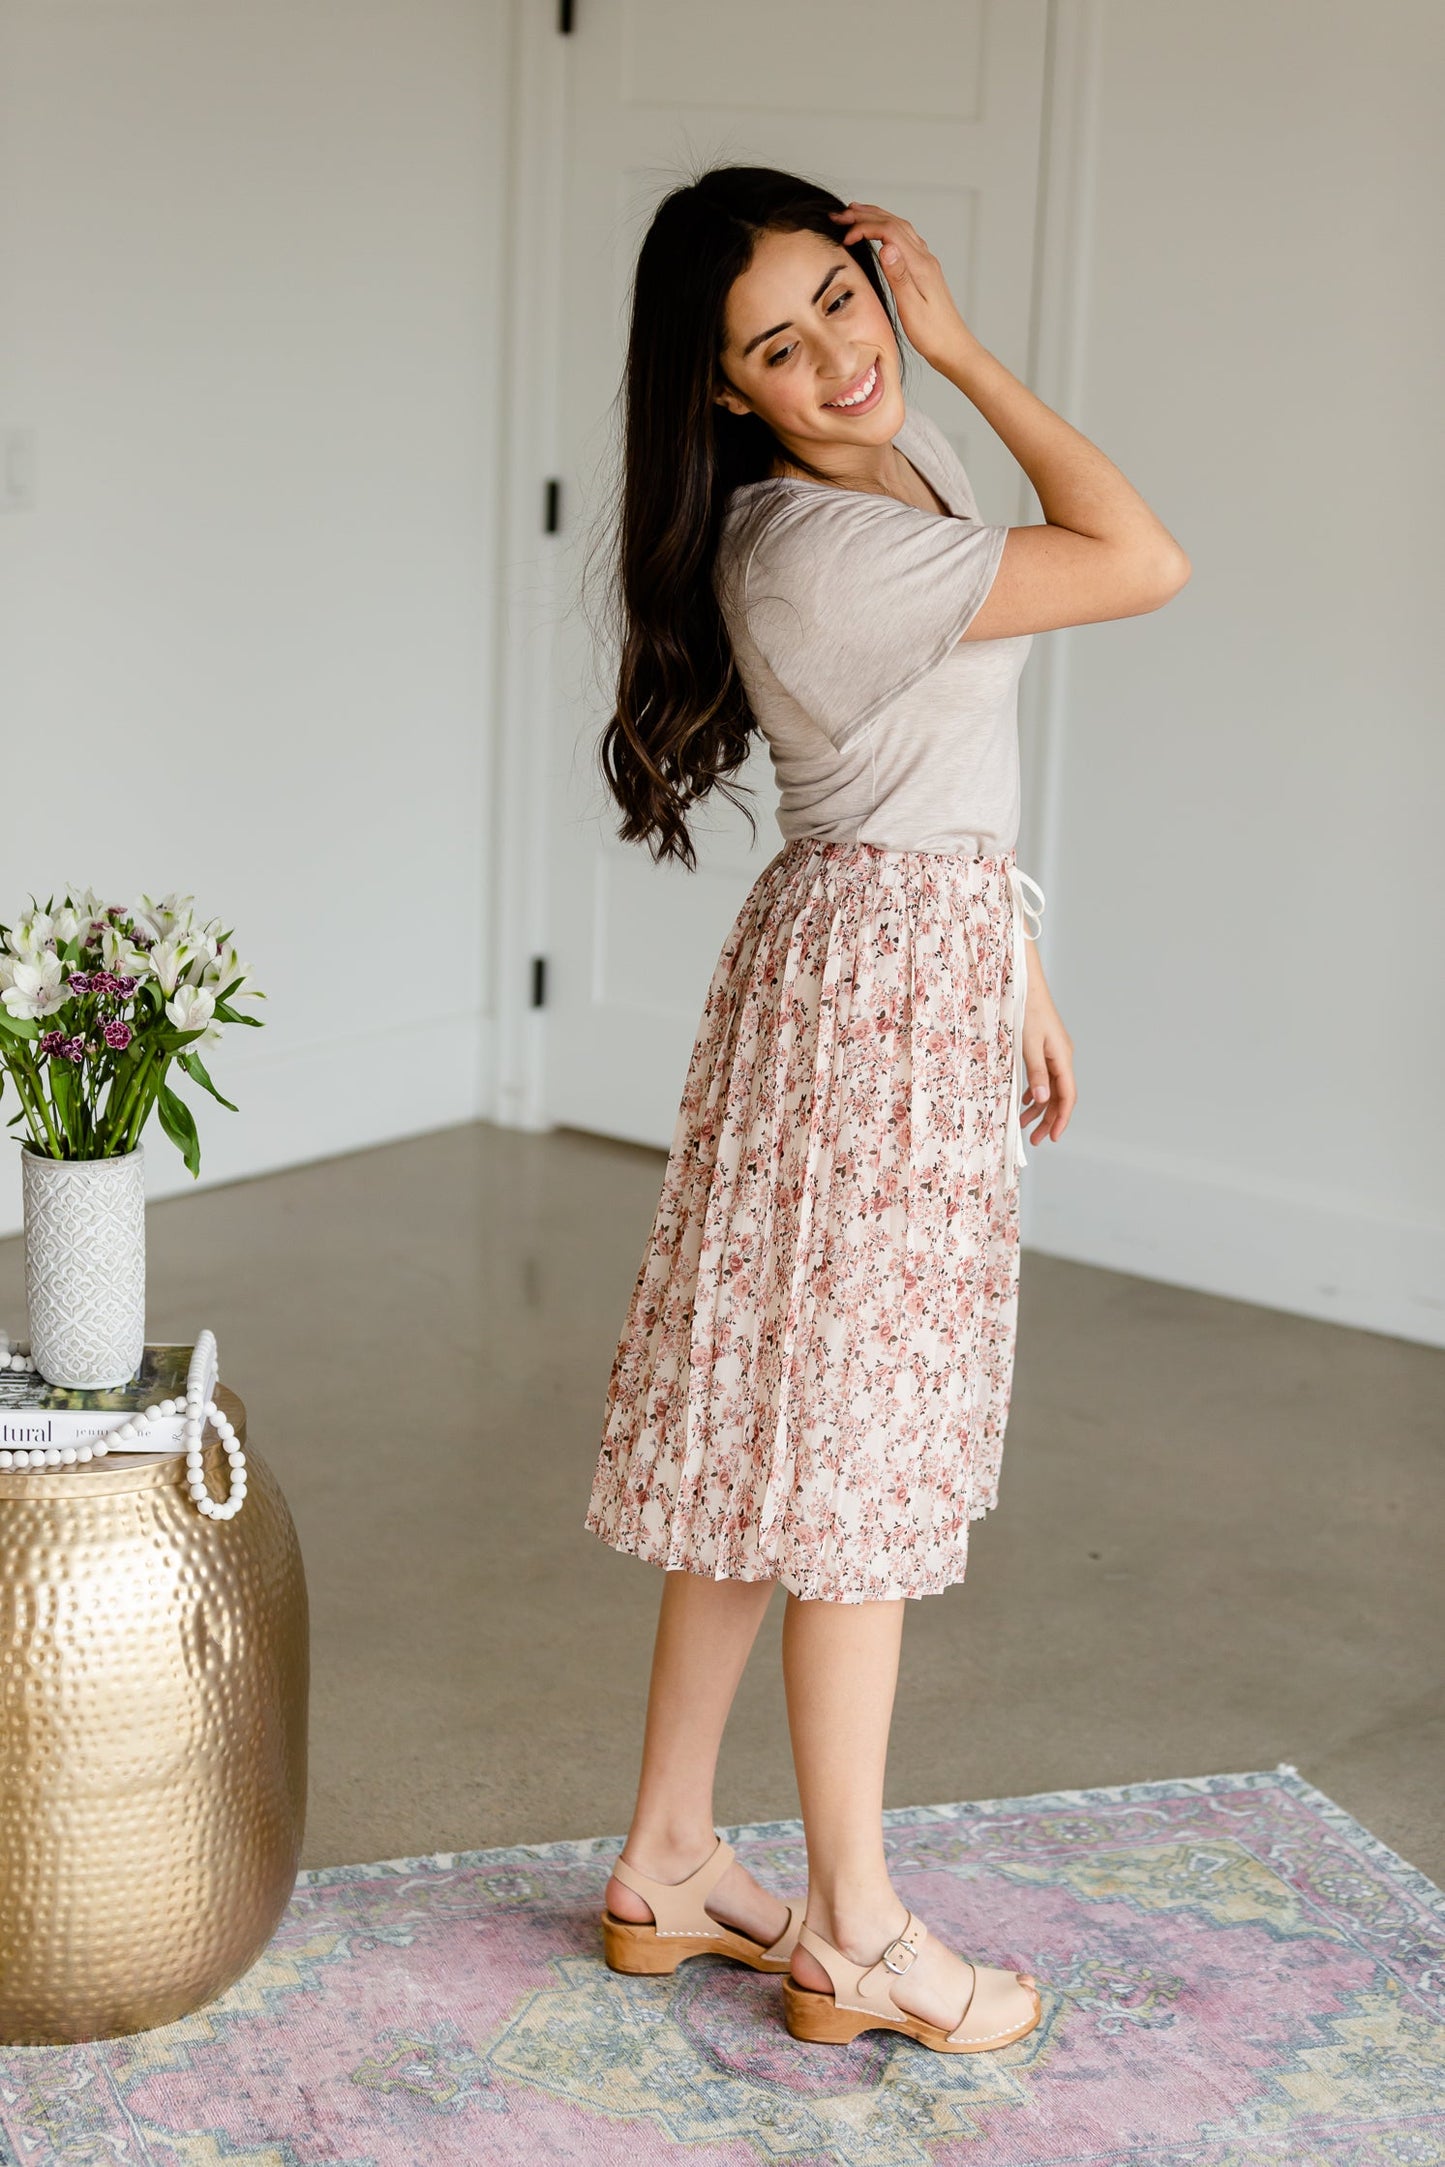 Peony Pink Bouquet Pleated Skirt - FINAL SALE Skirts